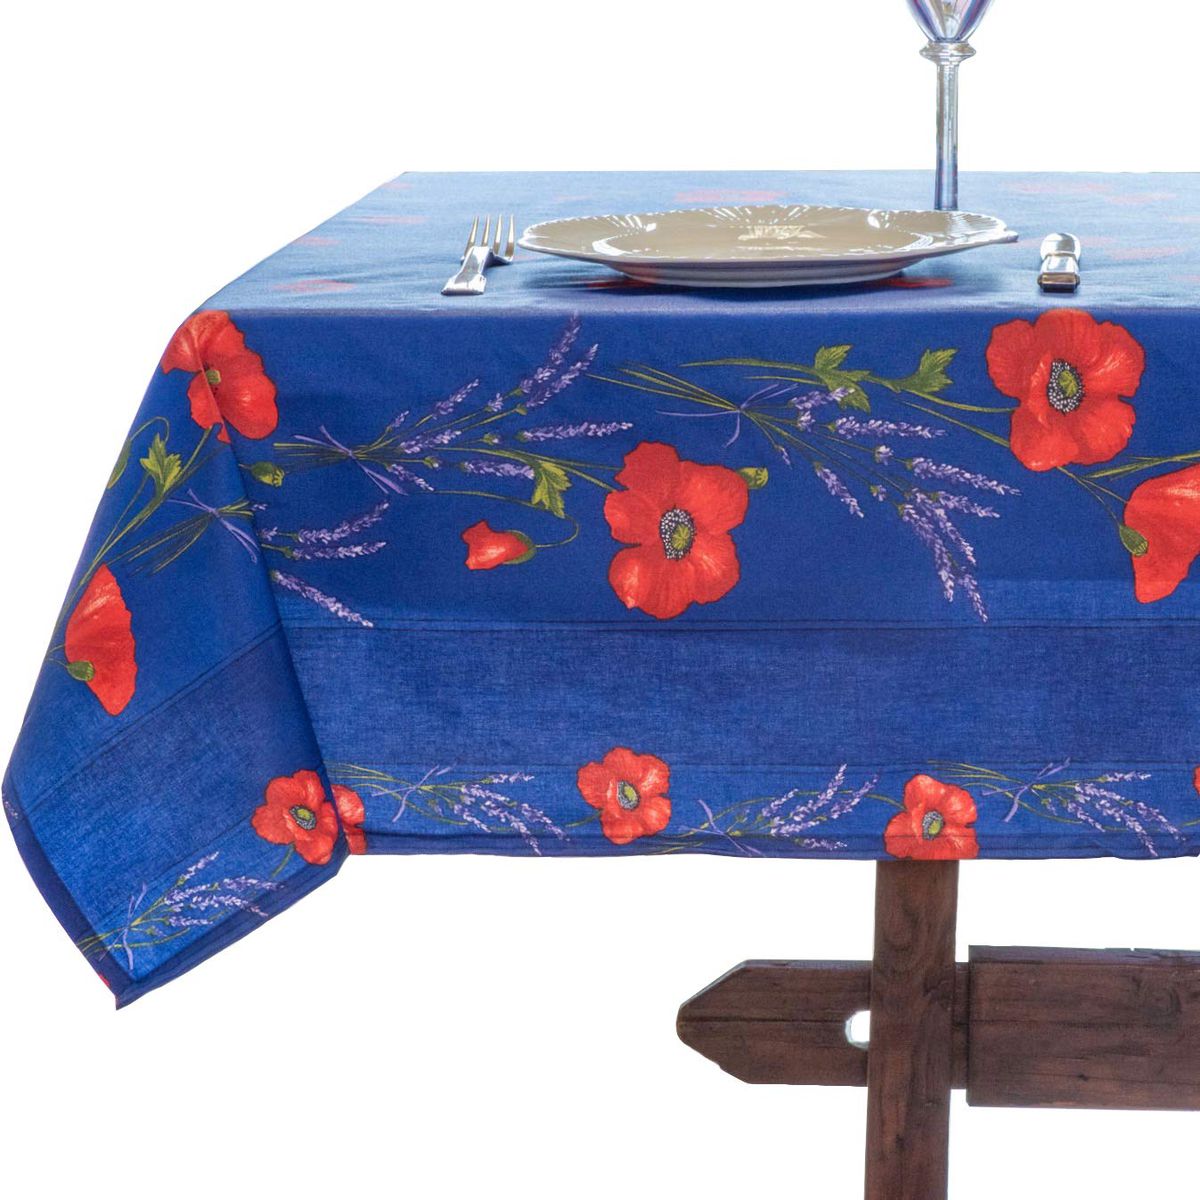 A blue tablecloth features French Provencal poppies on it. There is a white plate and silverware on the table.  